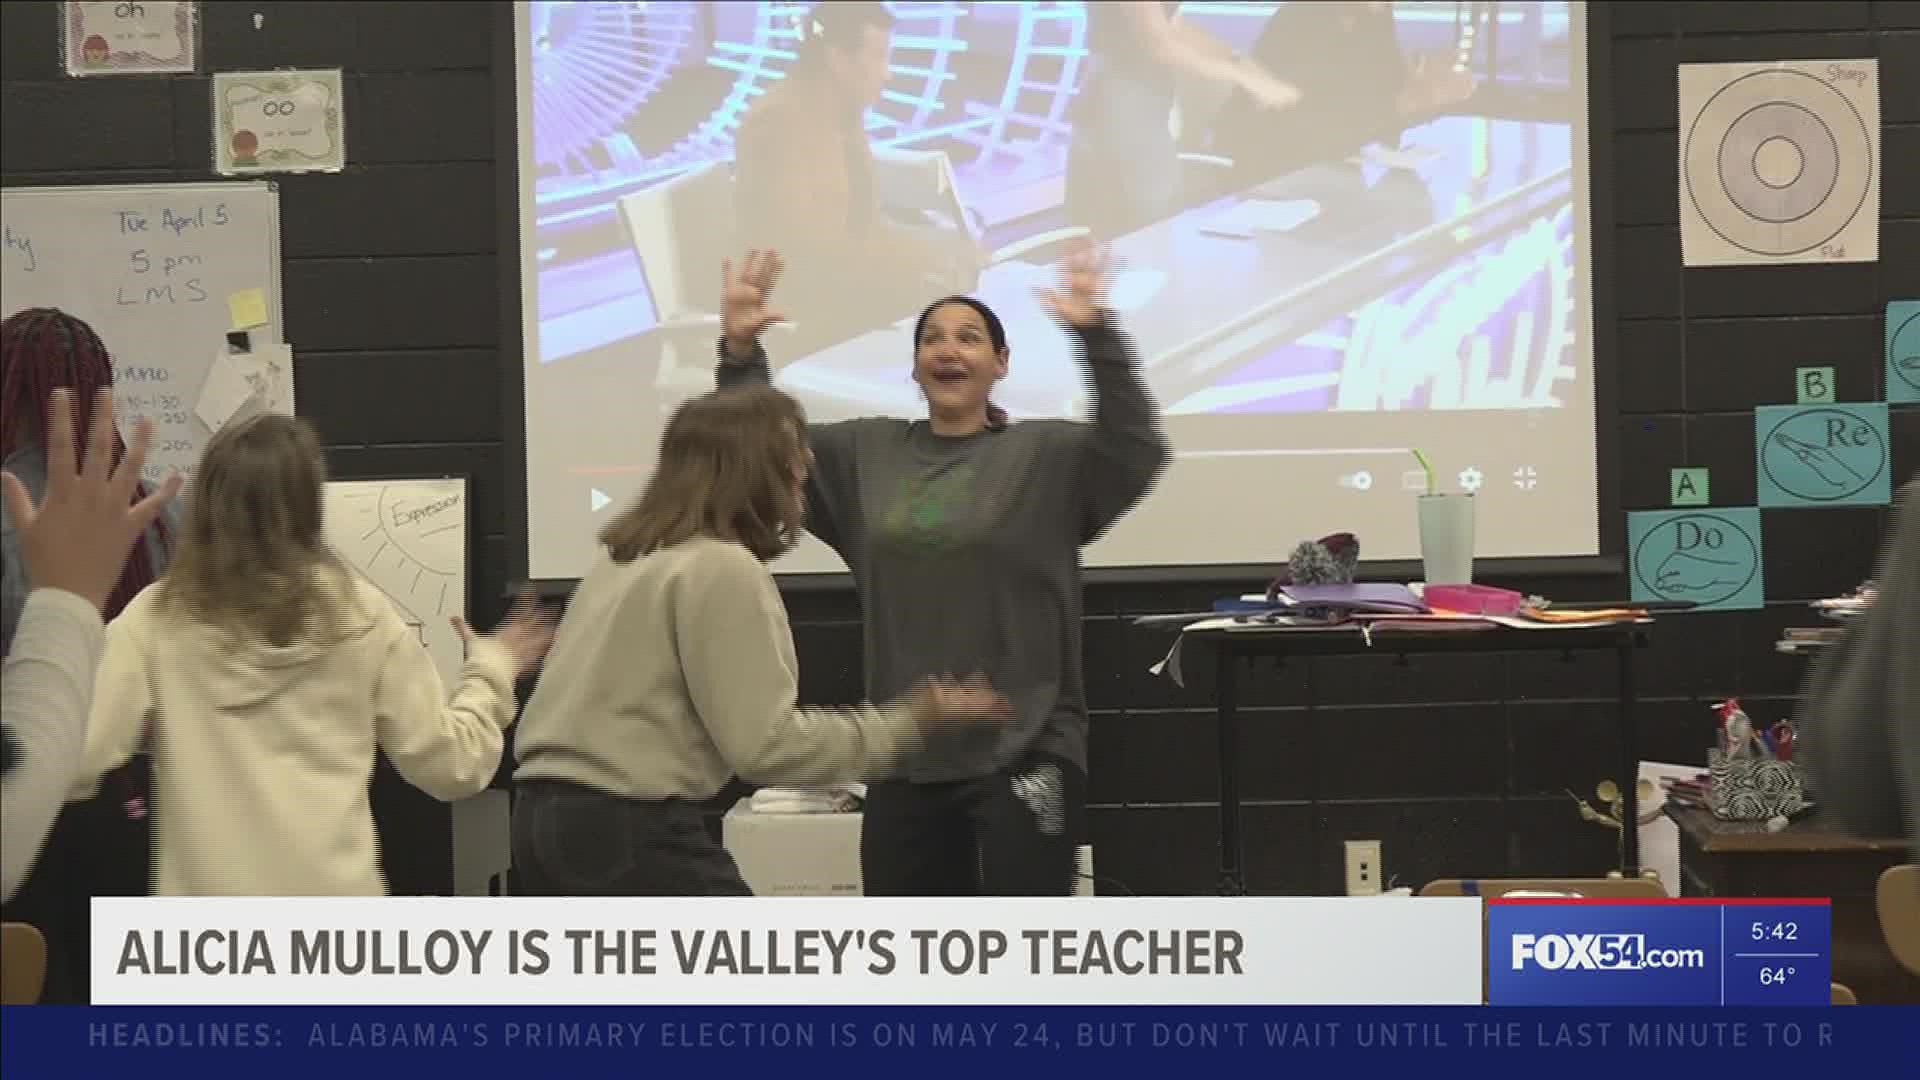 Congratulations to Alicia Mulloy of Liberty Middle School for being chosen as this week's Valley's Top Teacher.